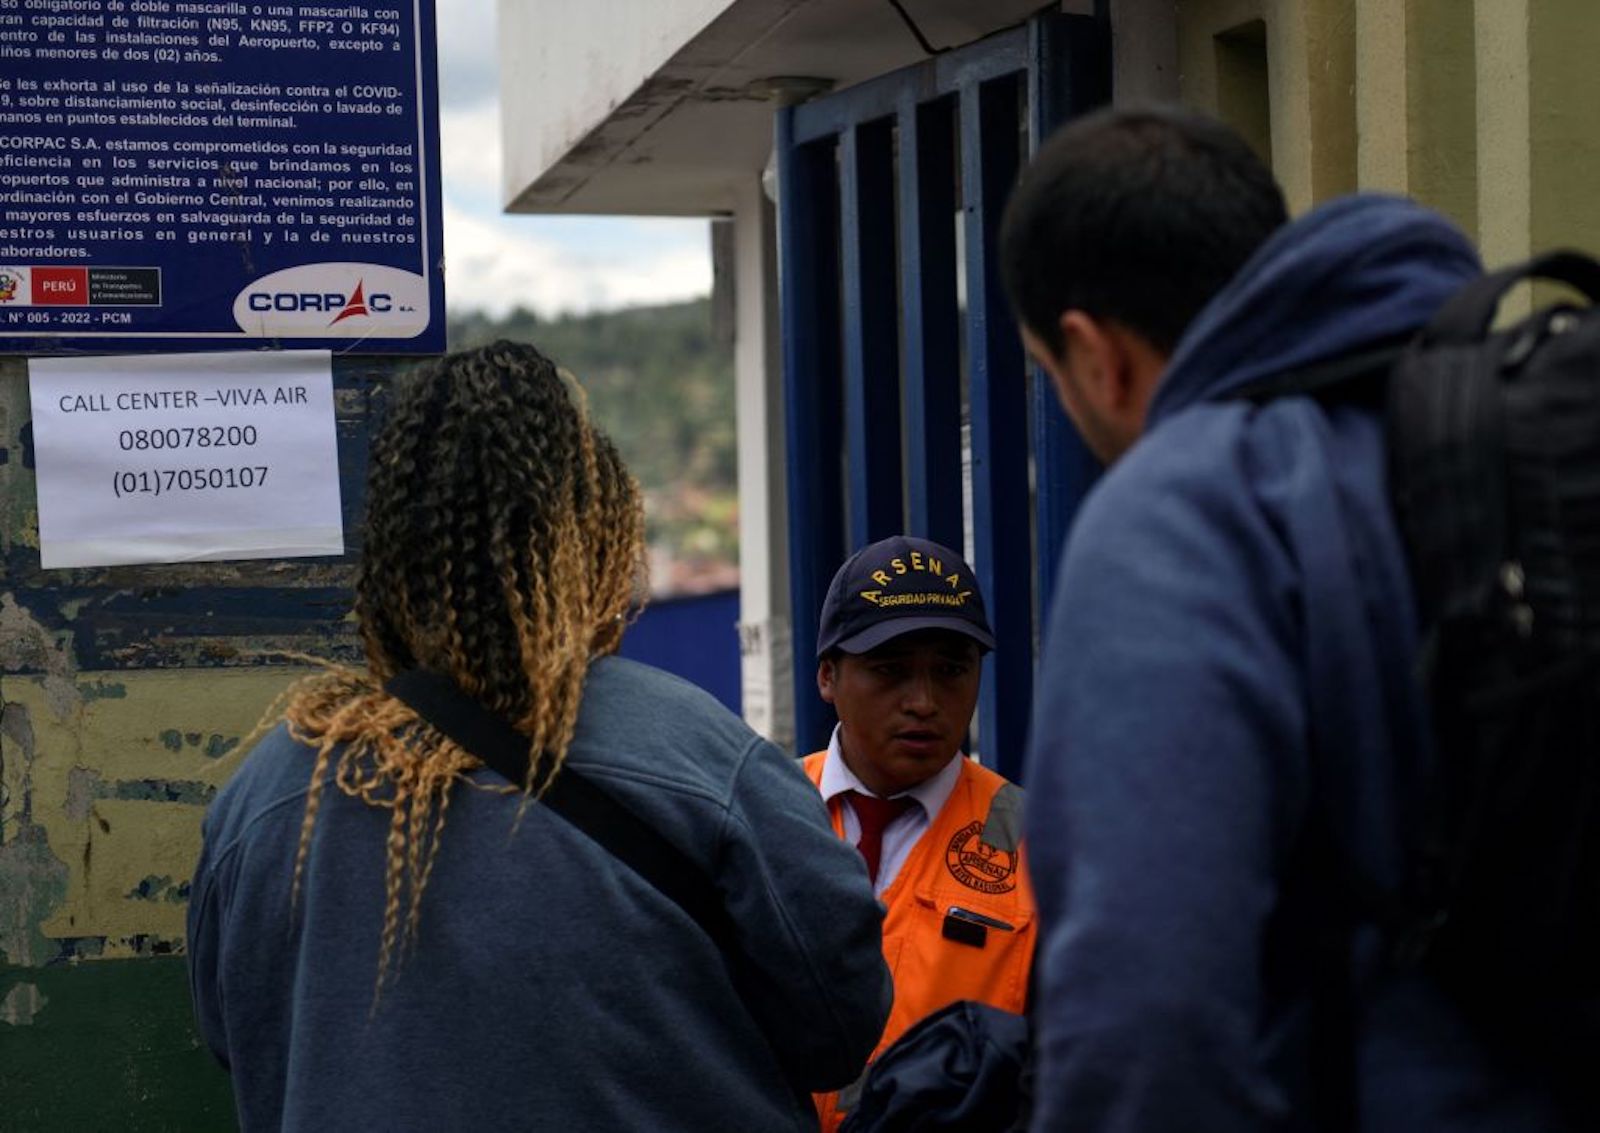 Two Colombian airlines stop working in a matter of weeks.  What's going on?